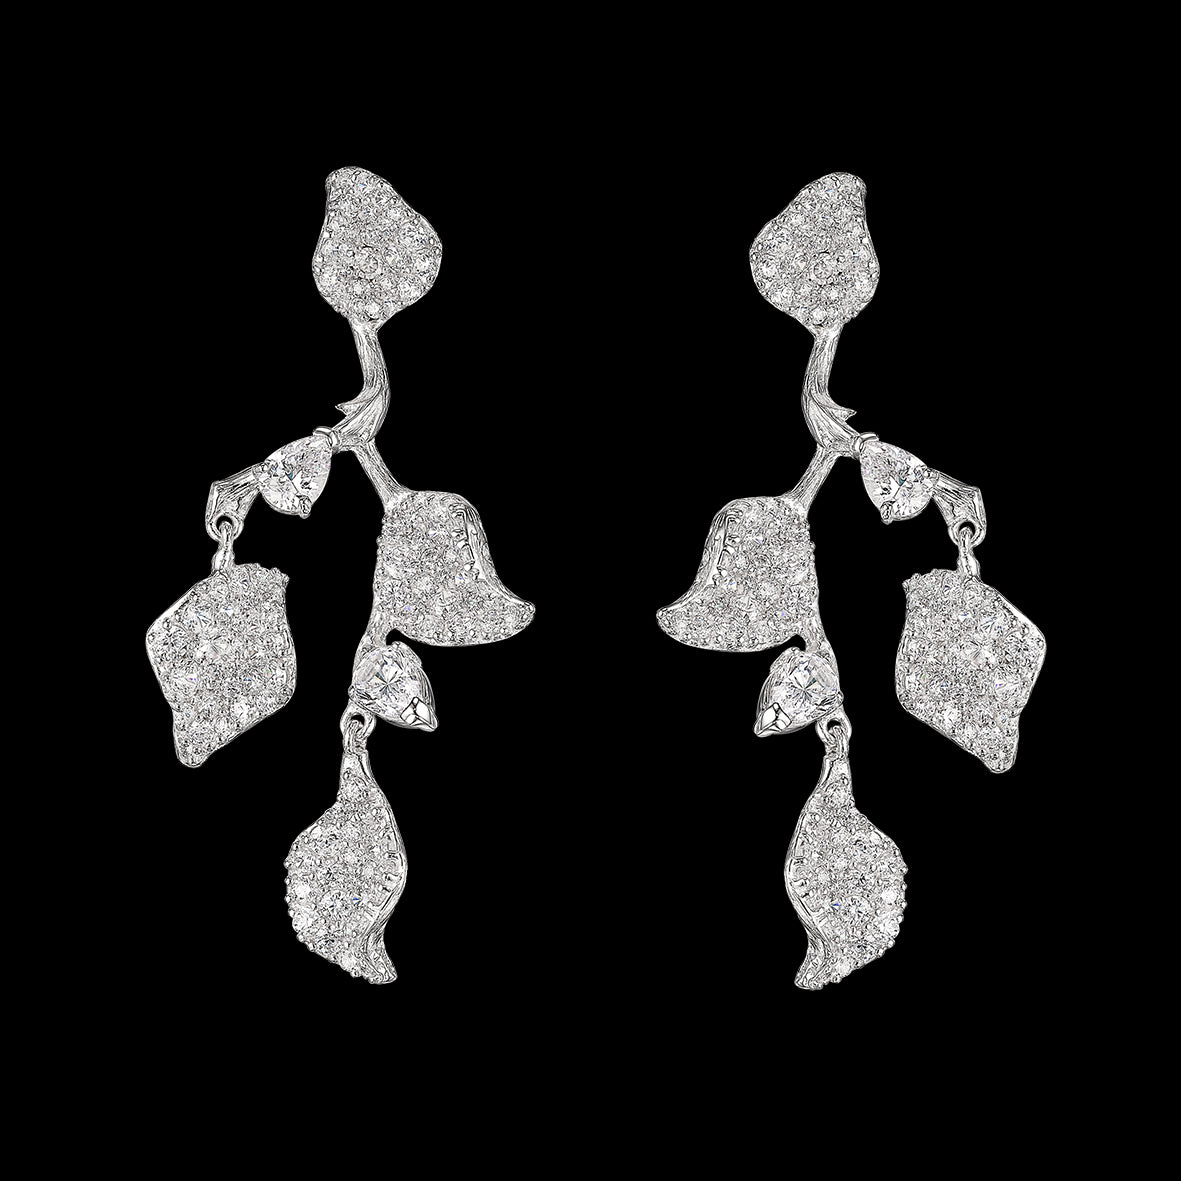 White Diamond Galatea Earrings, Earring, Anabela Chan Joaillerie - Fine jewelry with laboratory grown and created gemstones hand-crafted in the United Kingdom. Anabela Chan Joaillerie is the first fine jewellery brand in the world to champion laboratory-grown and created gemstones with high jewellery design, artisanal craftsmanship and a focus on ethical and sustainable innovations.